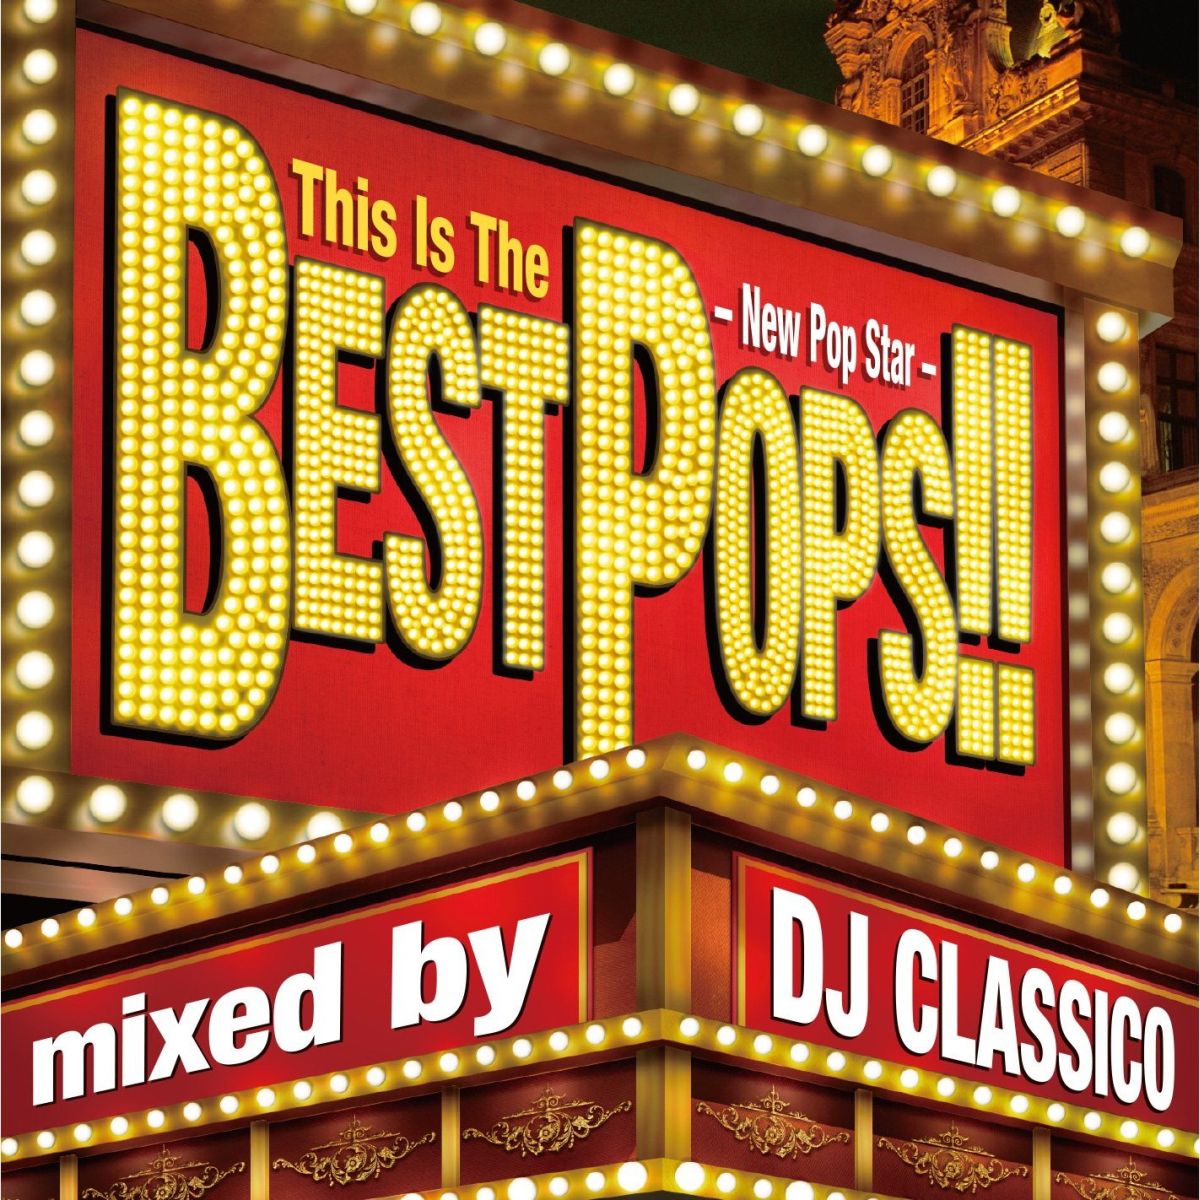 This Is The BEST POPS!! -New Pop Star- mixed by DJ CLASSICO画像